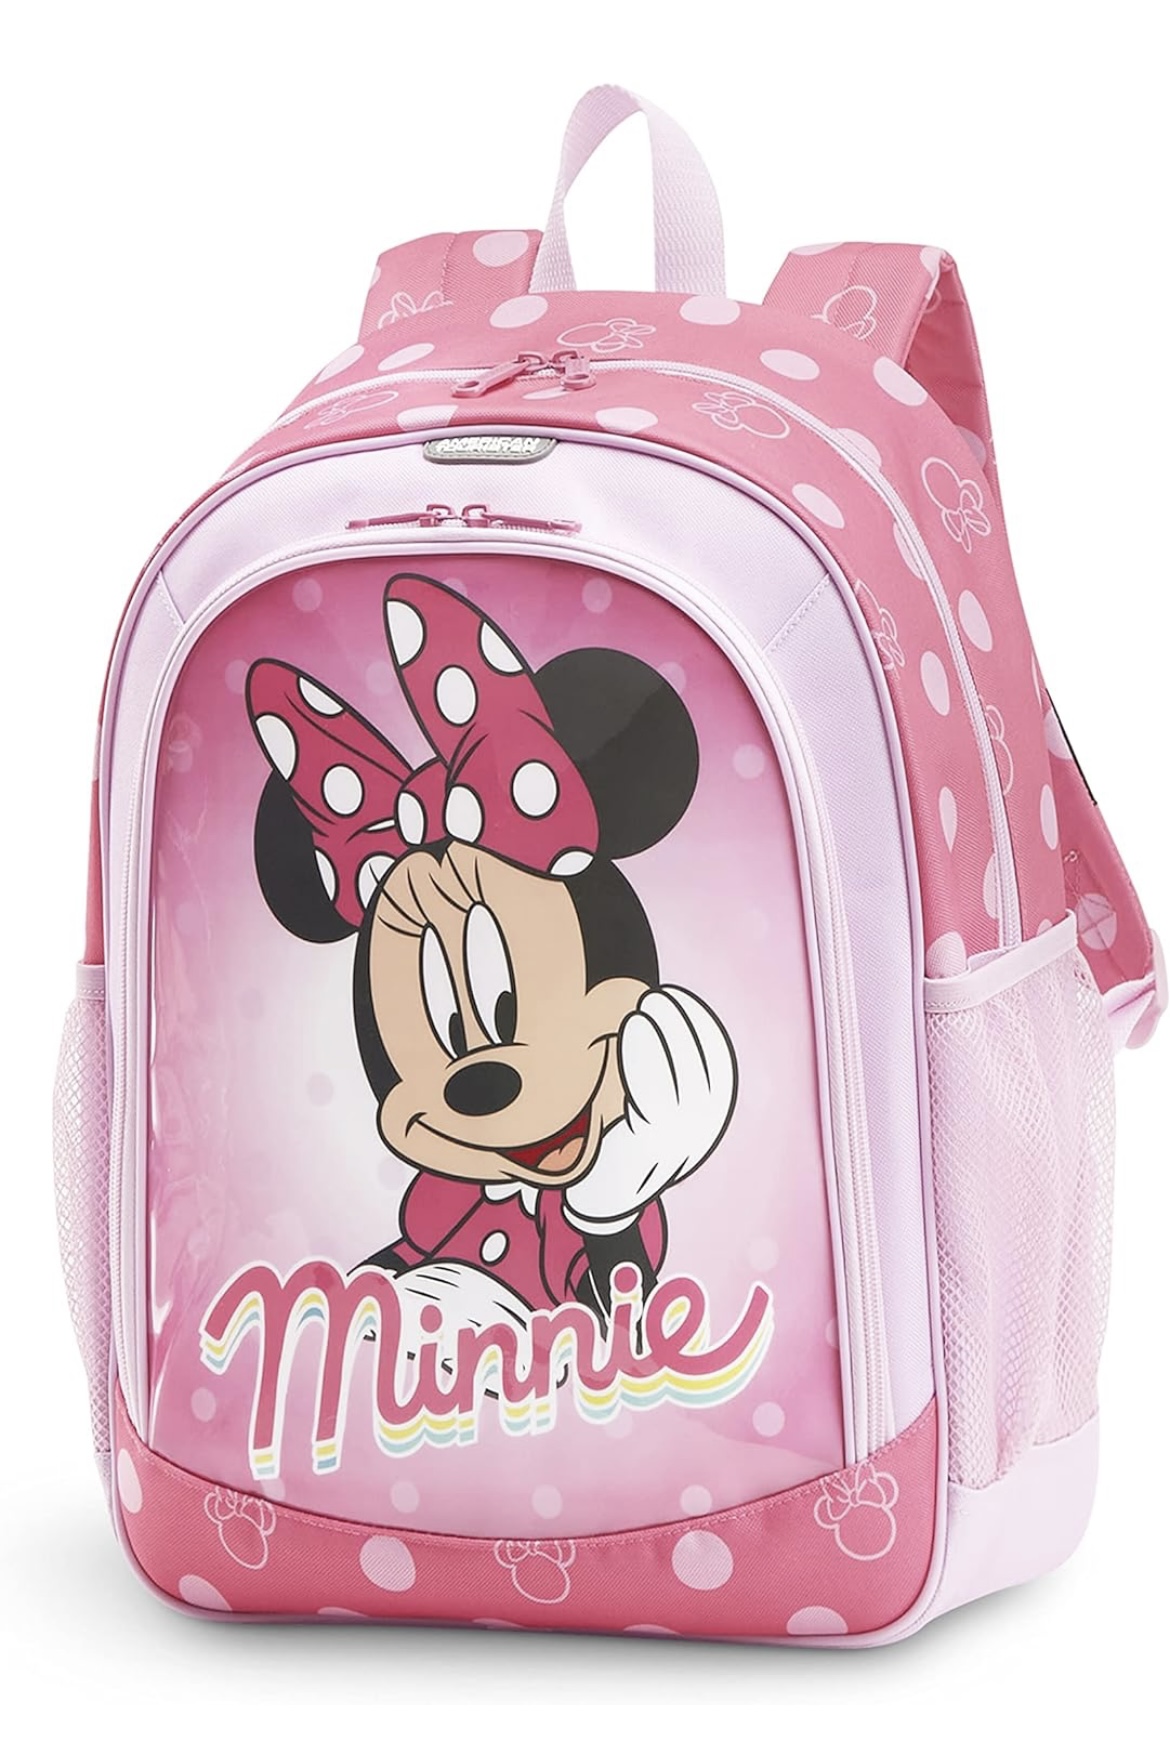 American Tourister Bag for Kids Minnie Mouse